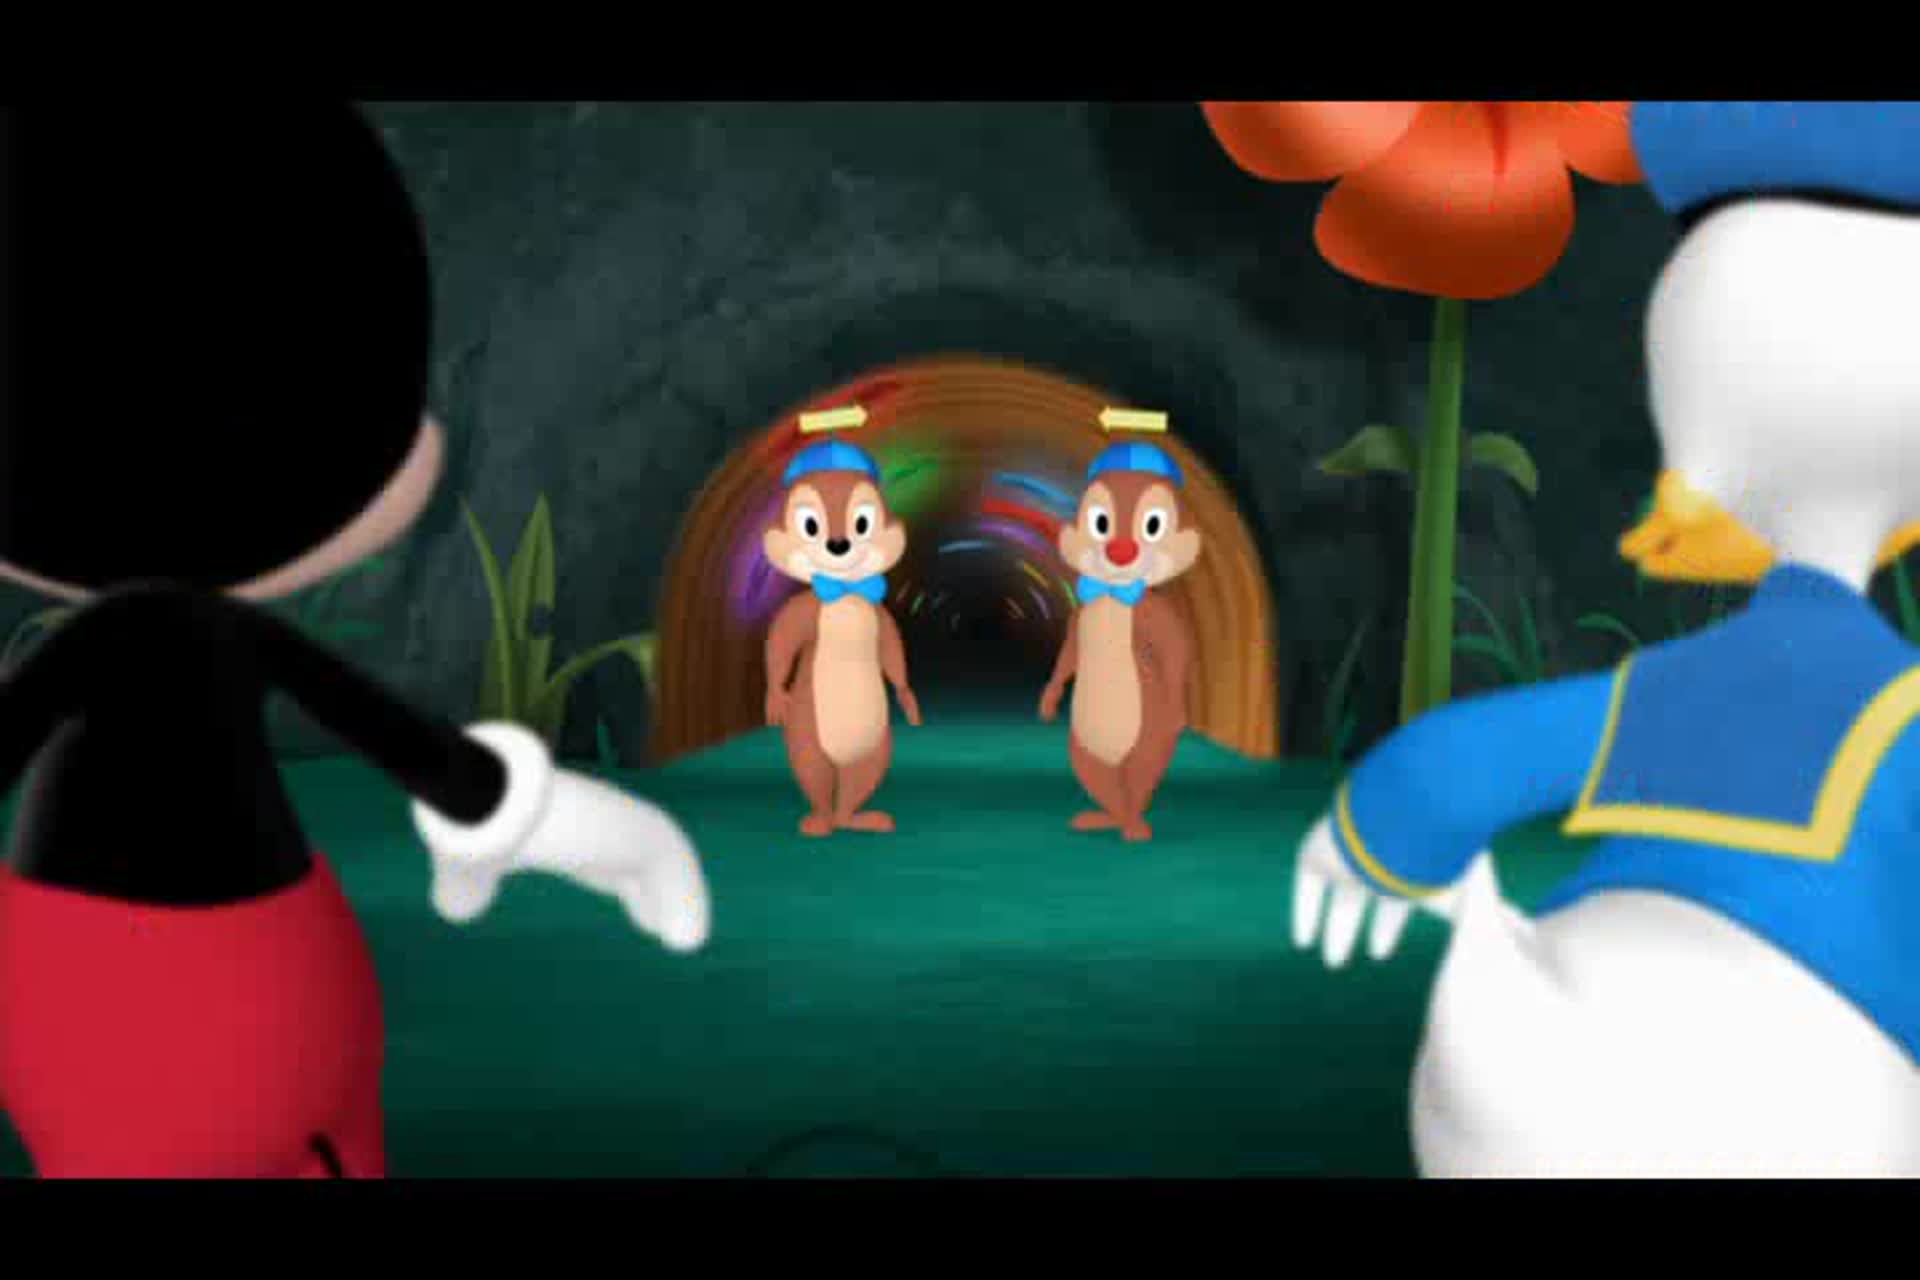 Mickey mouse clubhouse Mickey-s adventures in wonderland end